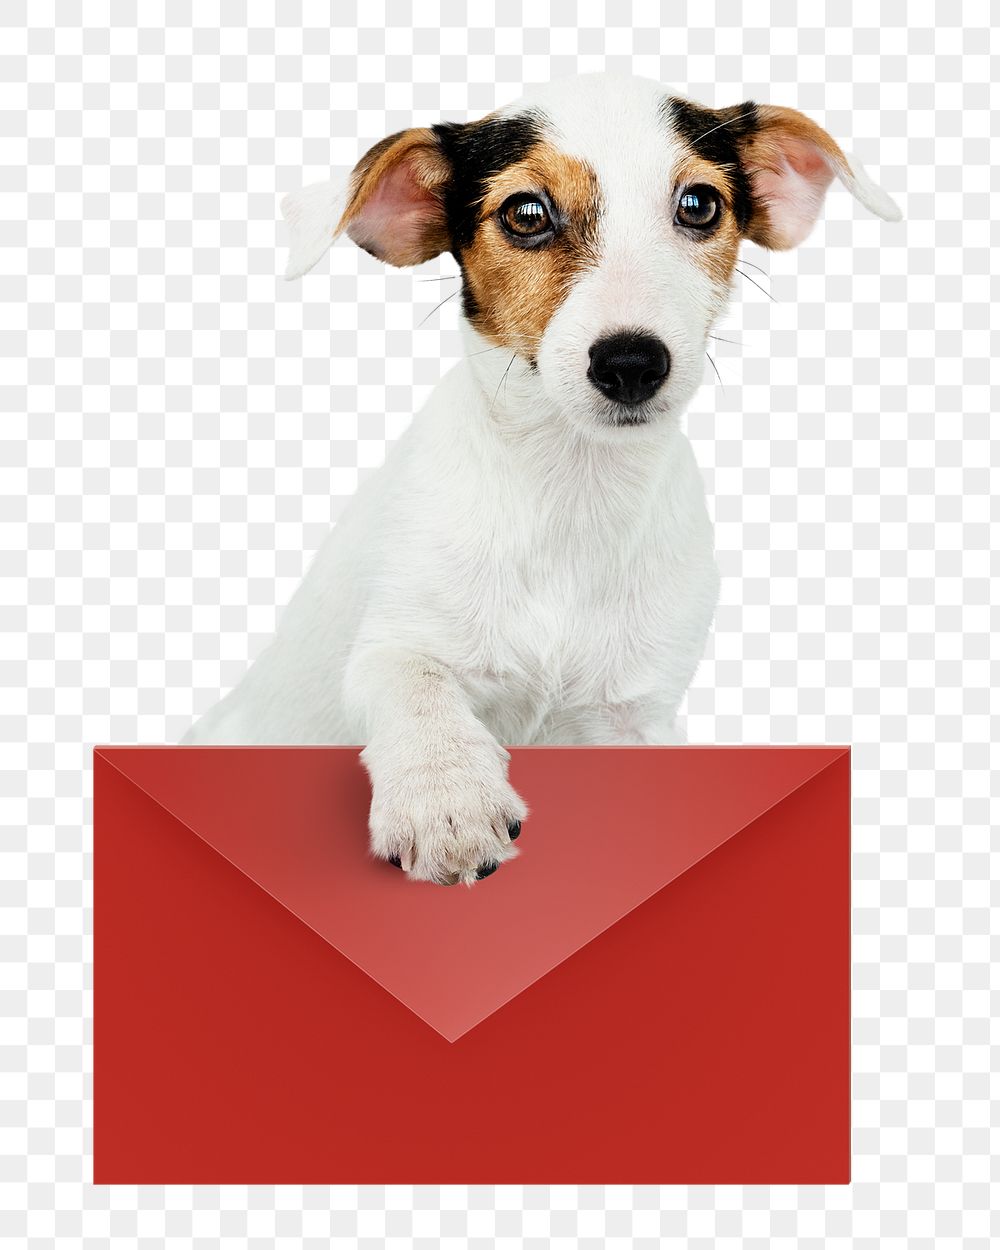 Valentine's puppy png sticker, holding envelope, cute collage element on transparent background